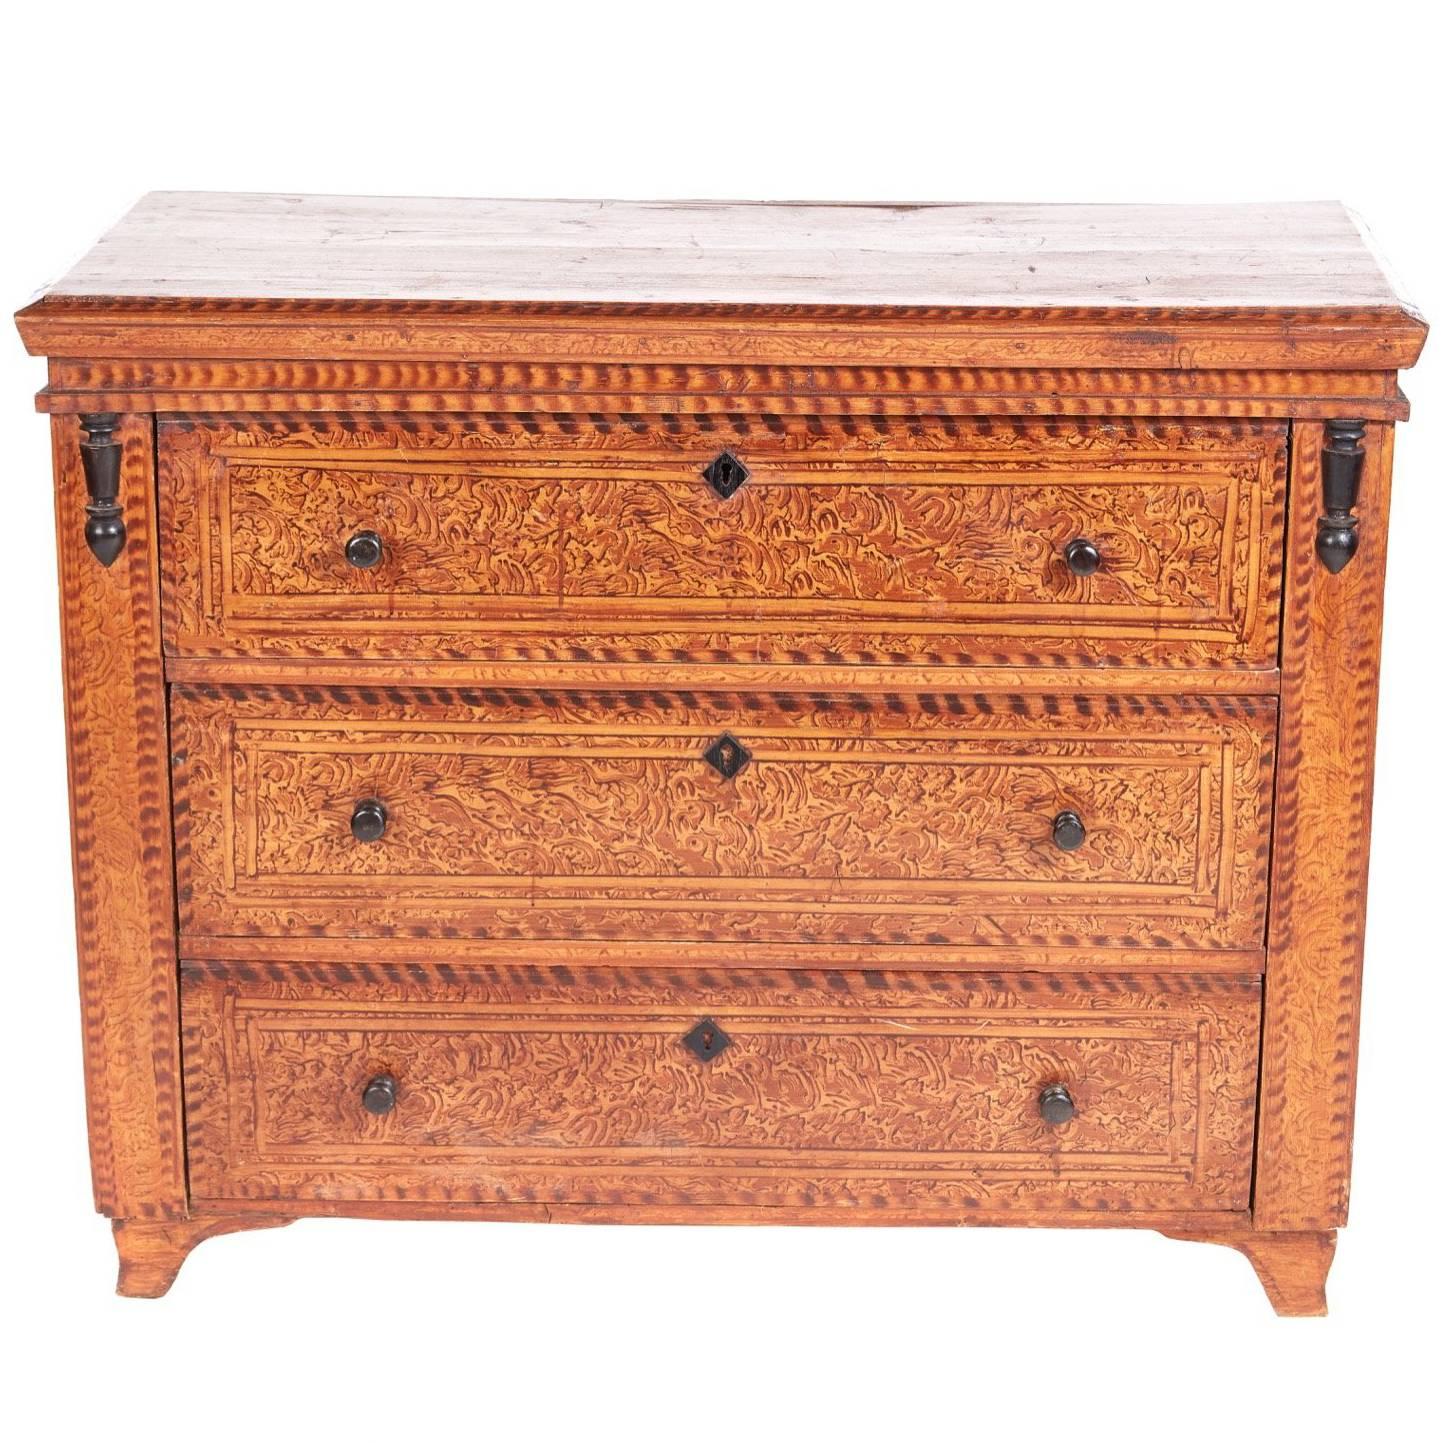 Original Painted Scumbled Commode Chest